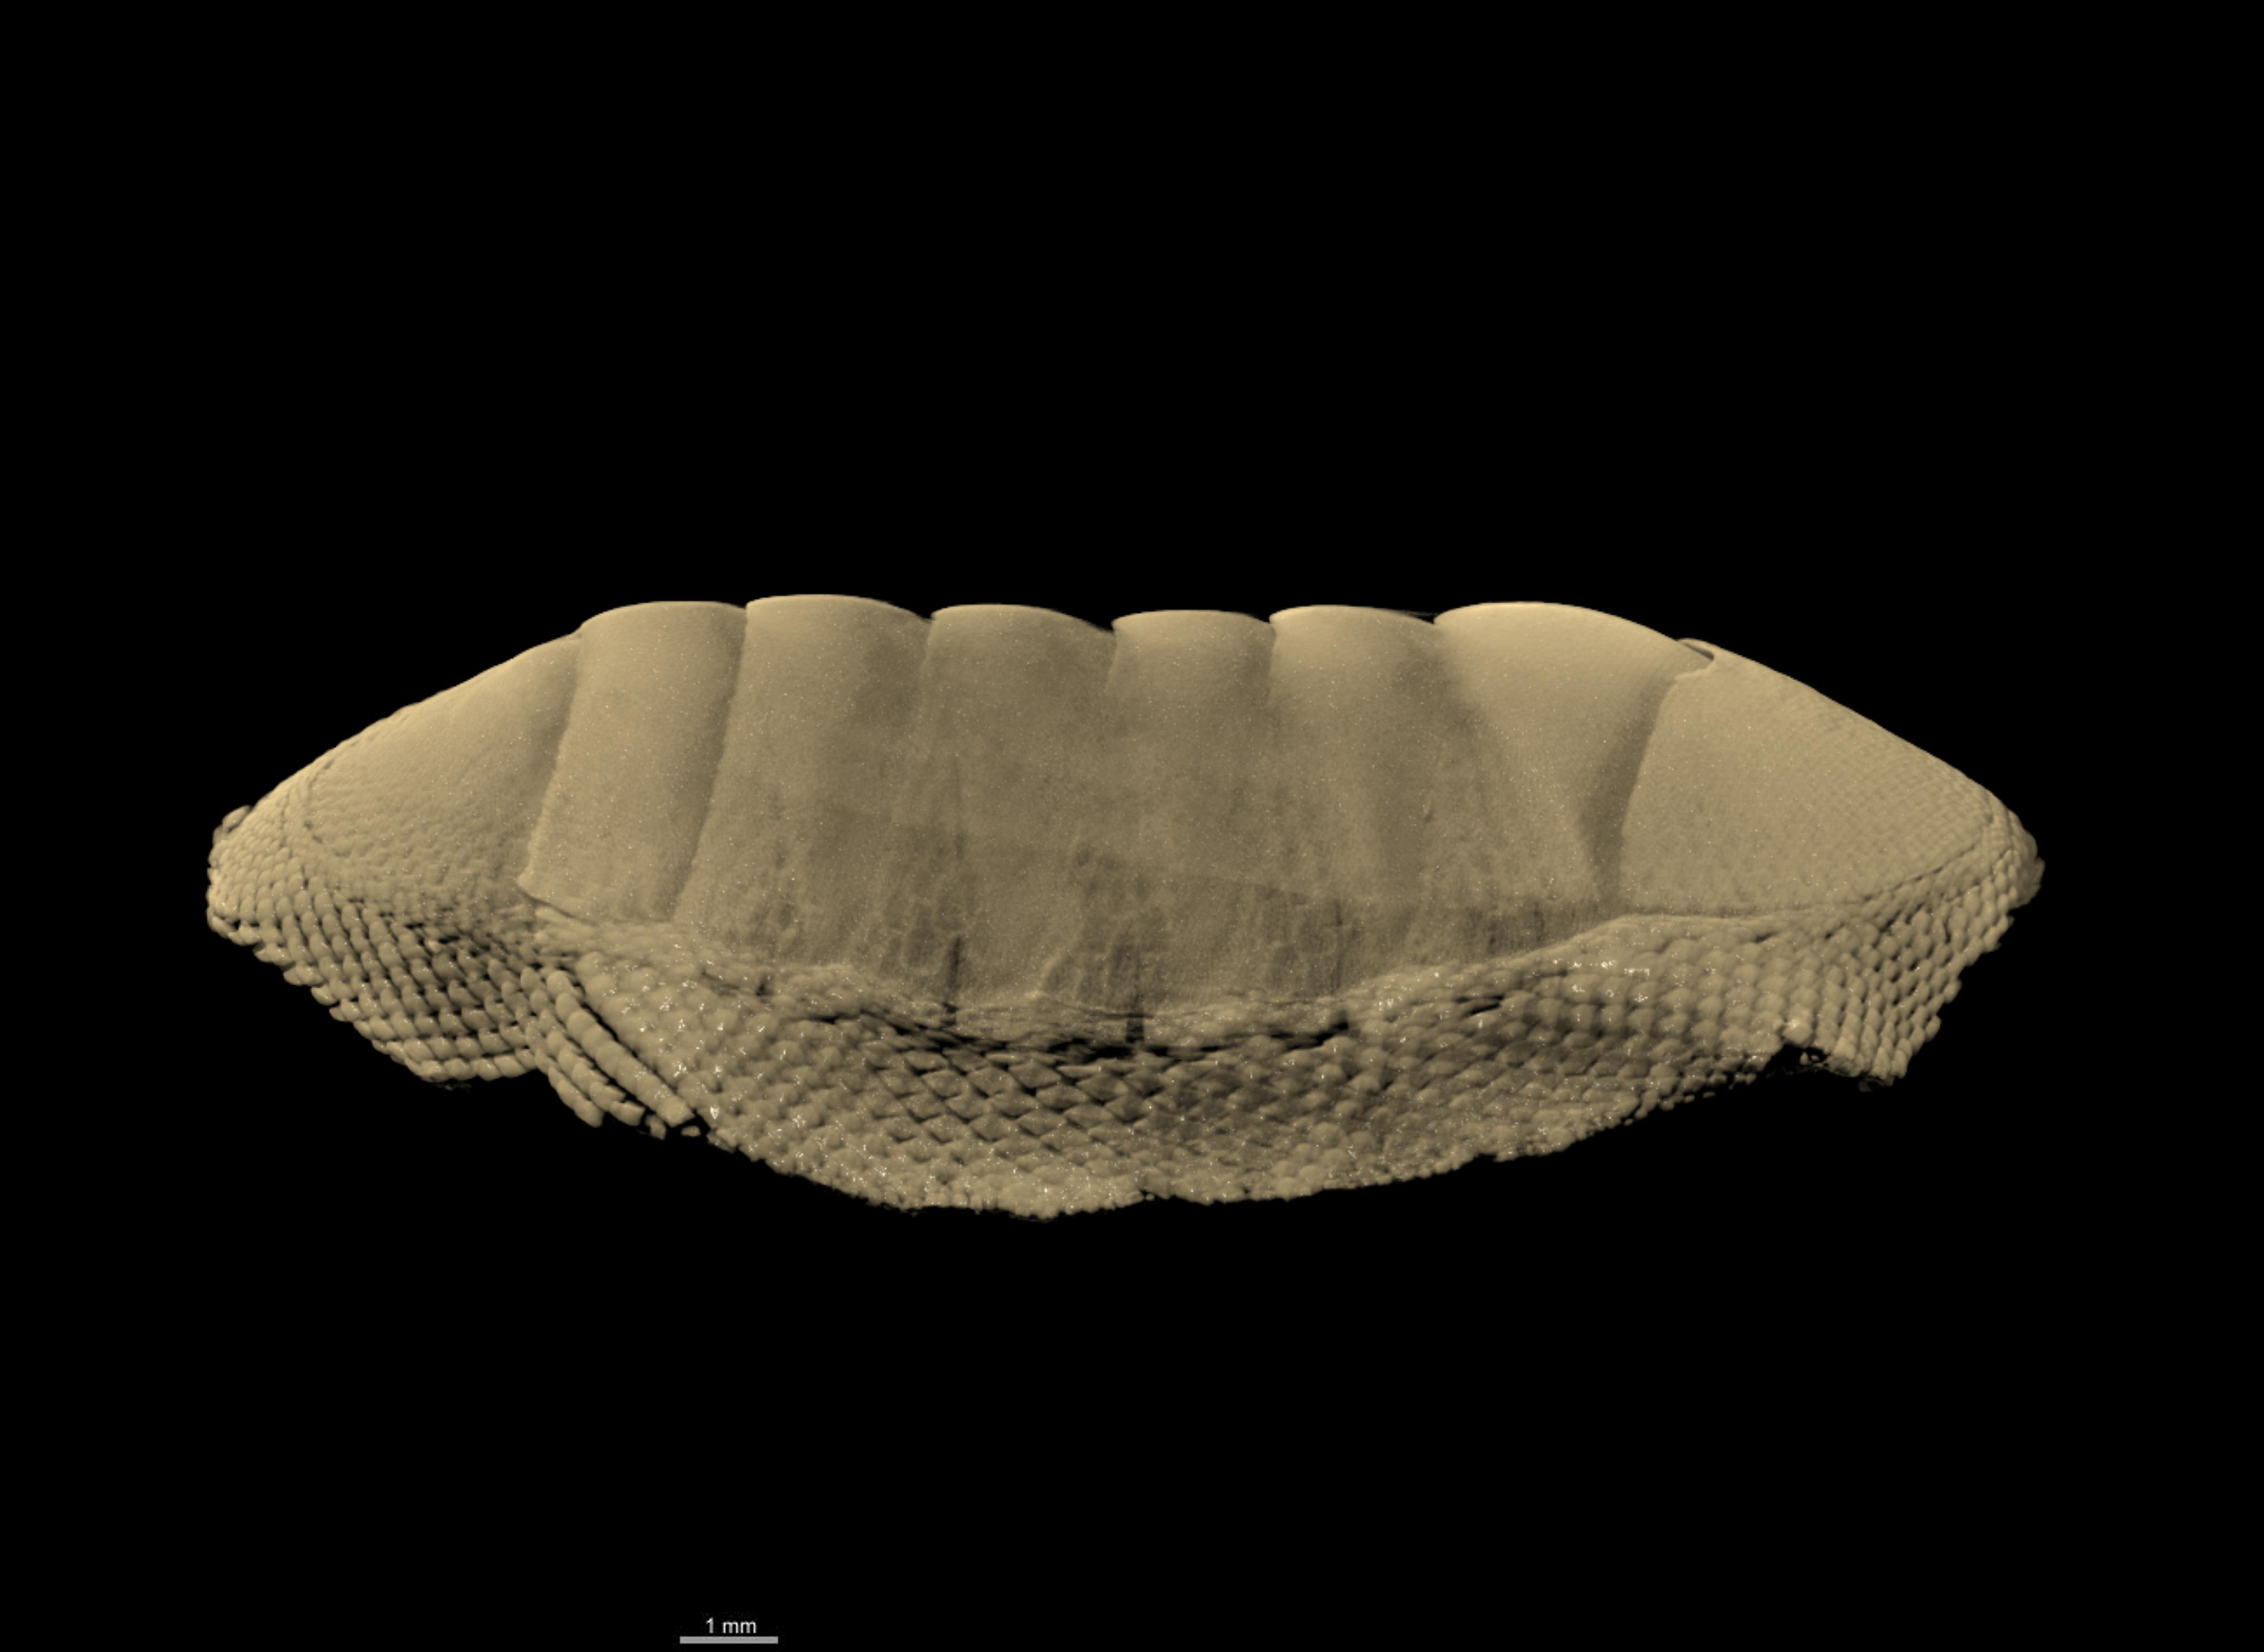 BE-RBINS-INV PARATYPE MT.3764 Chiton vangoethemi MICROCT XRE LATERAL.jpg